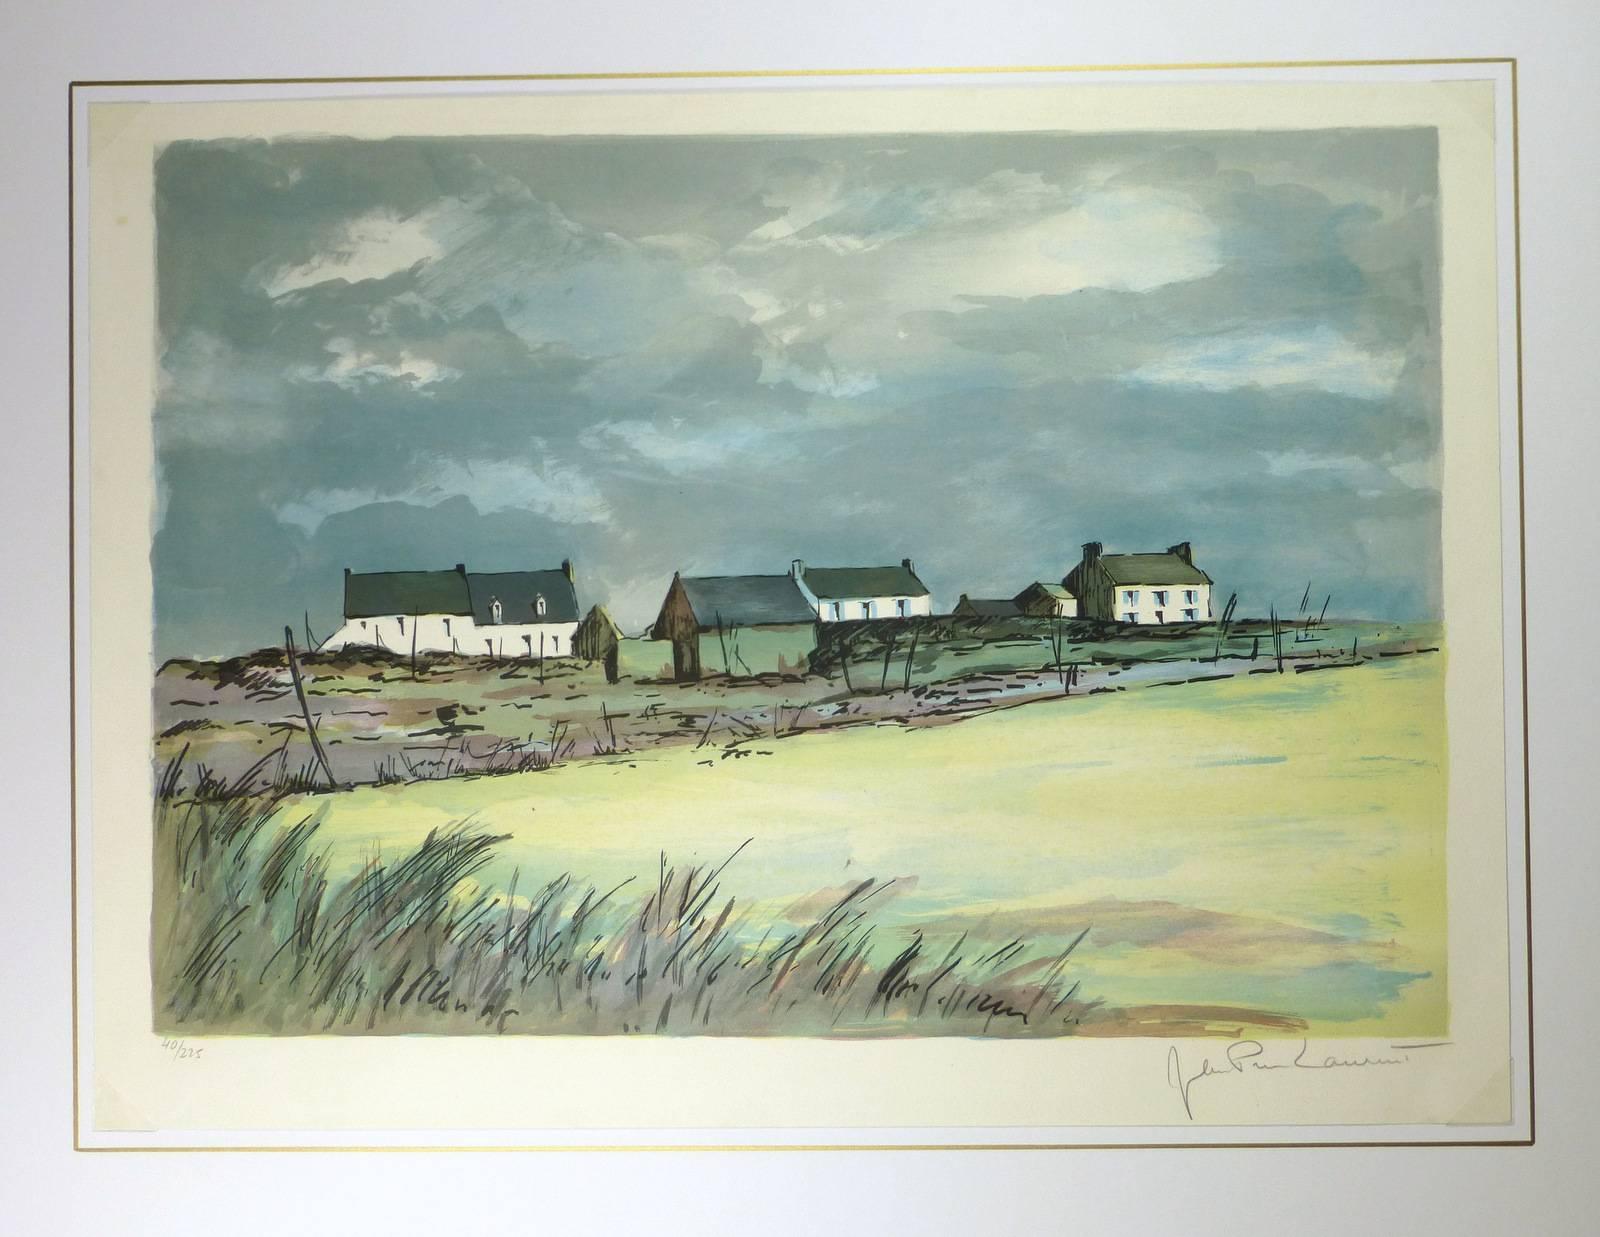 Beautifully detailed stone lithograph of scenic farm scene by French artist J. P. Laurent, circa 1990. Signed lower right.  40/225

Original artwork on paper displayed on a white mat with a gold border. Mat fits a standard-size frame.  Archival